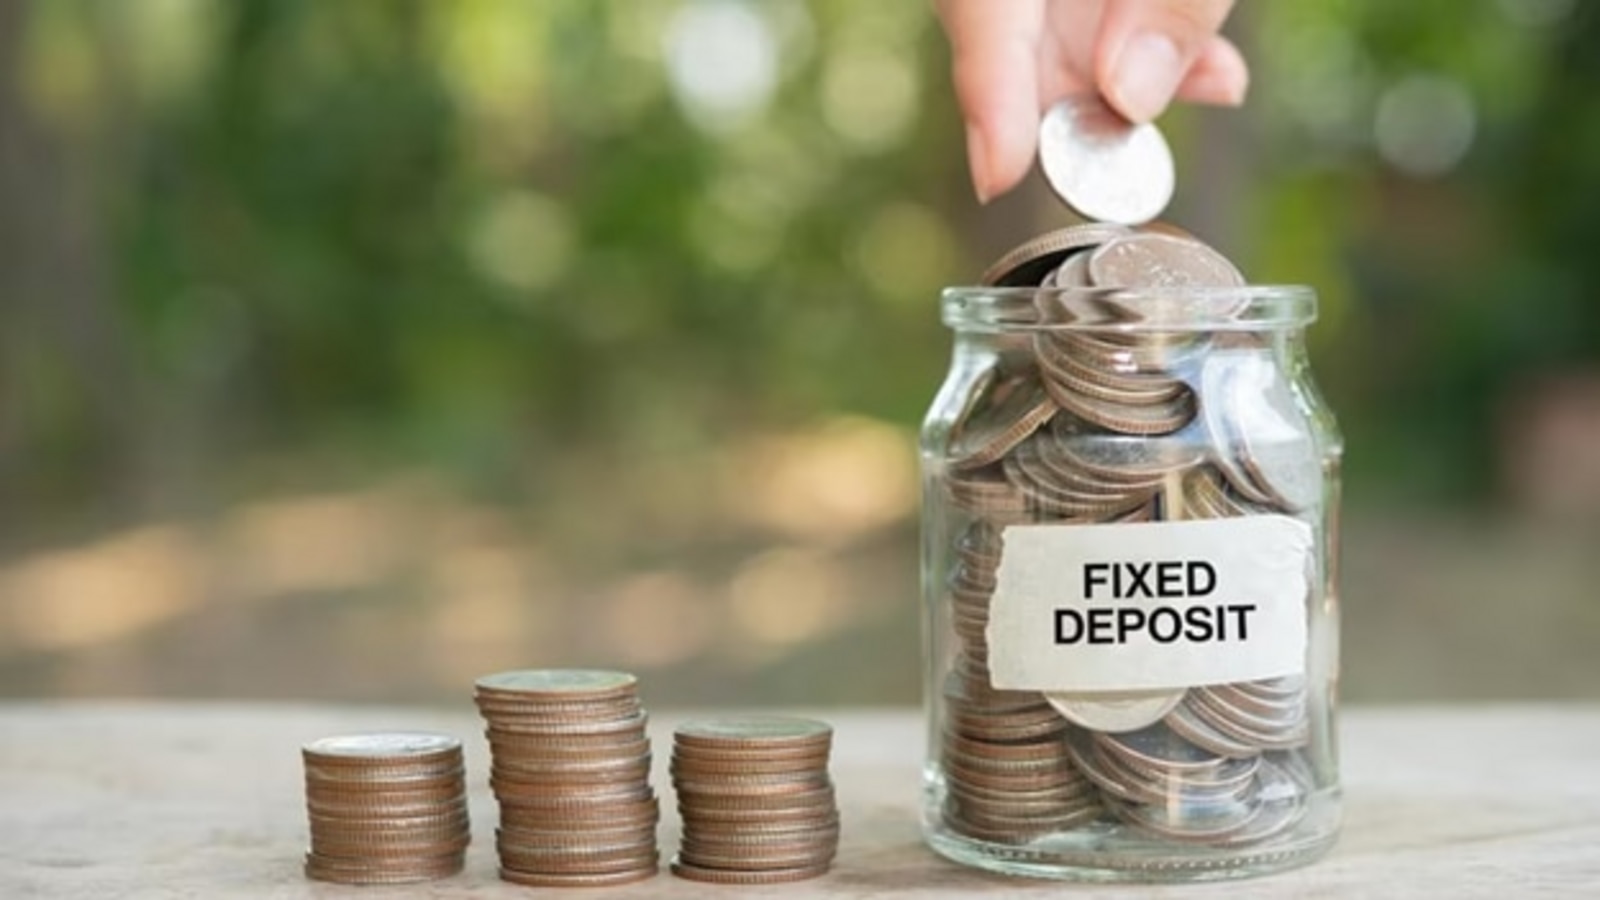 Rising fixed deposit interest rates: Is now the time to secure your savings?